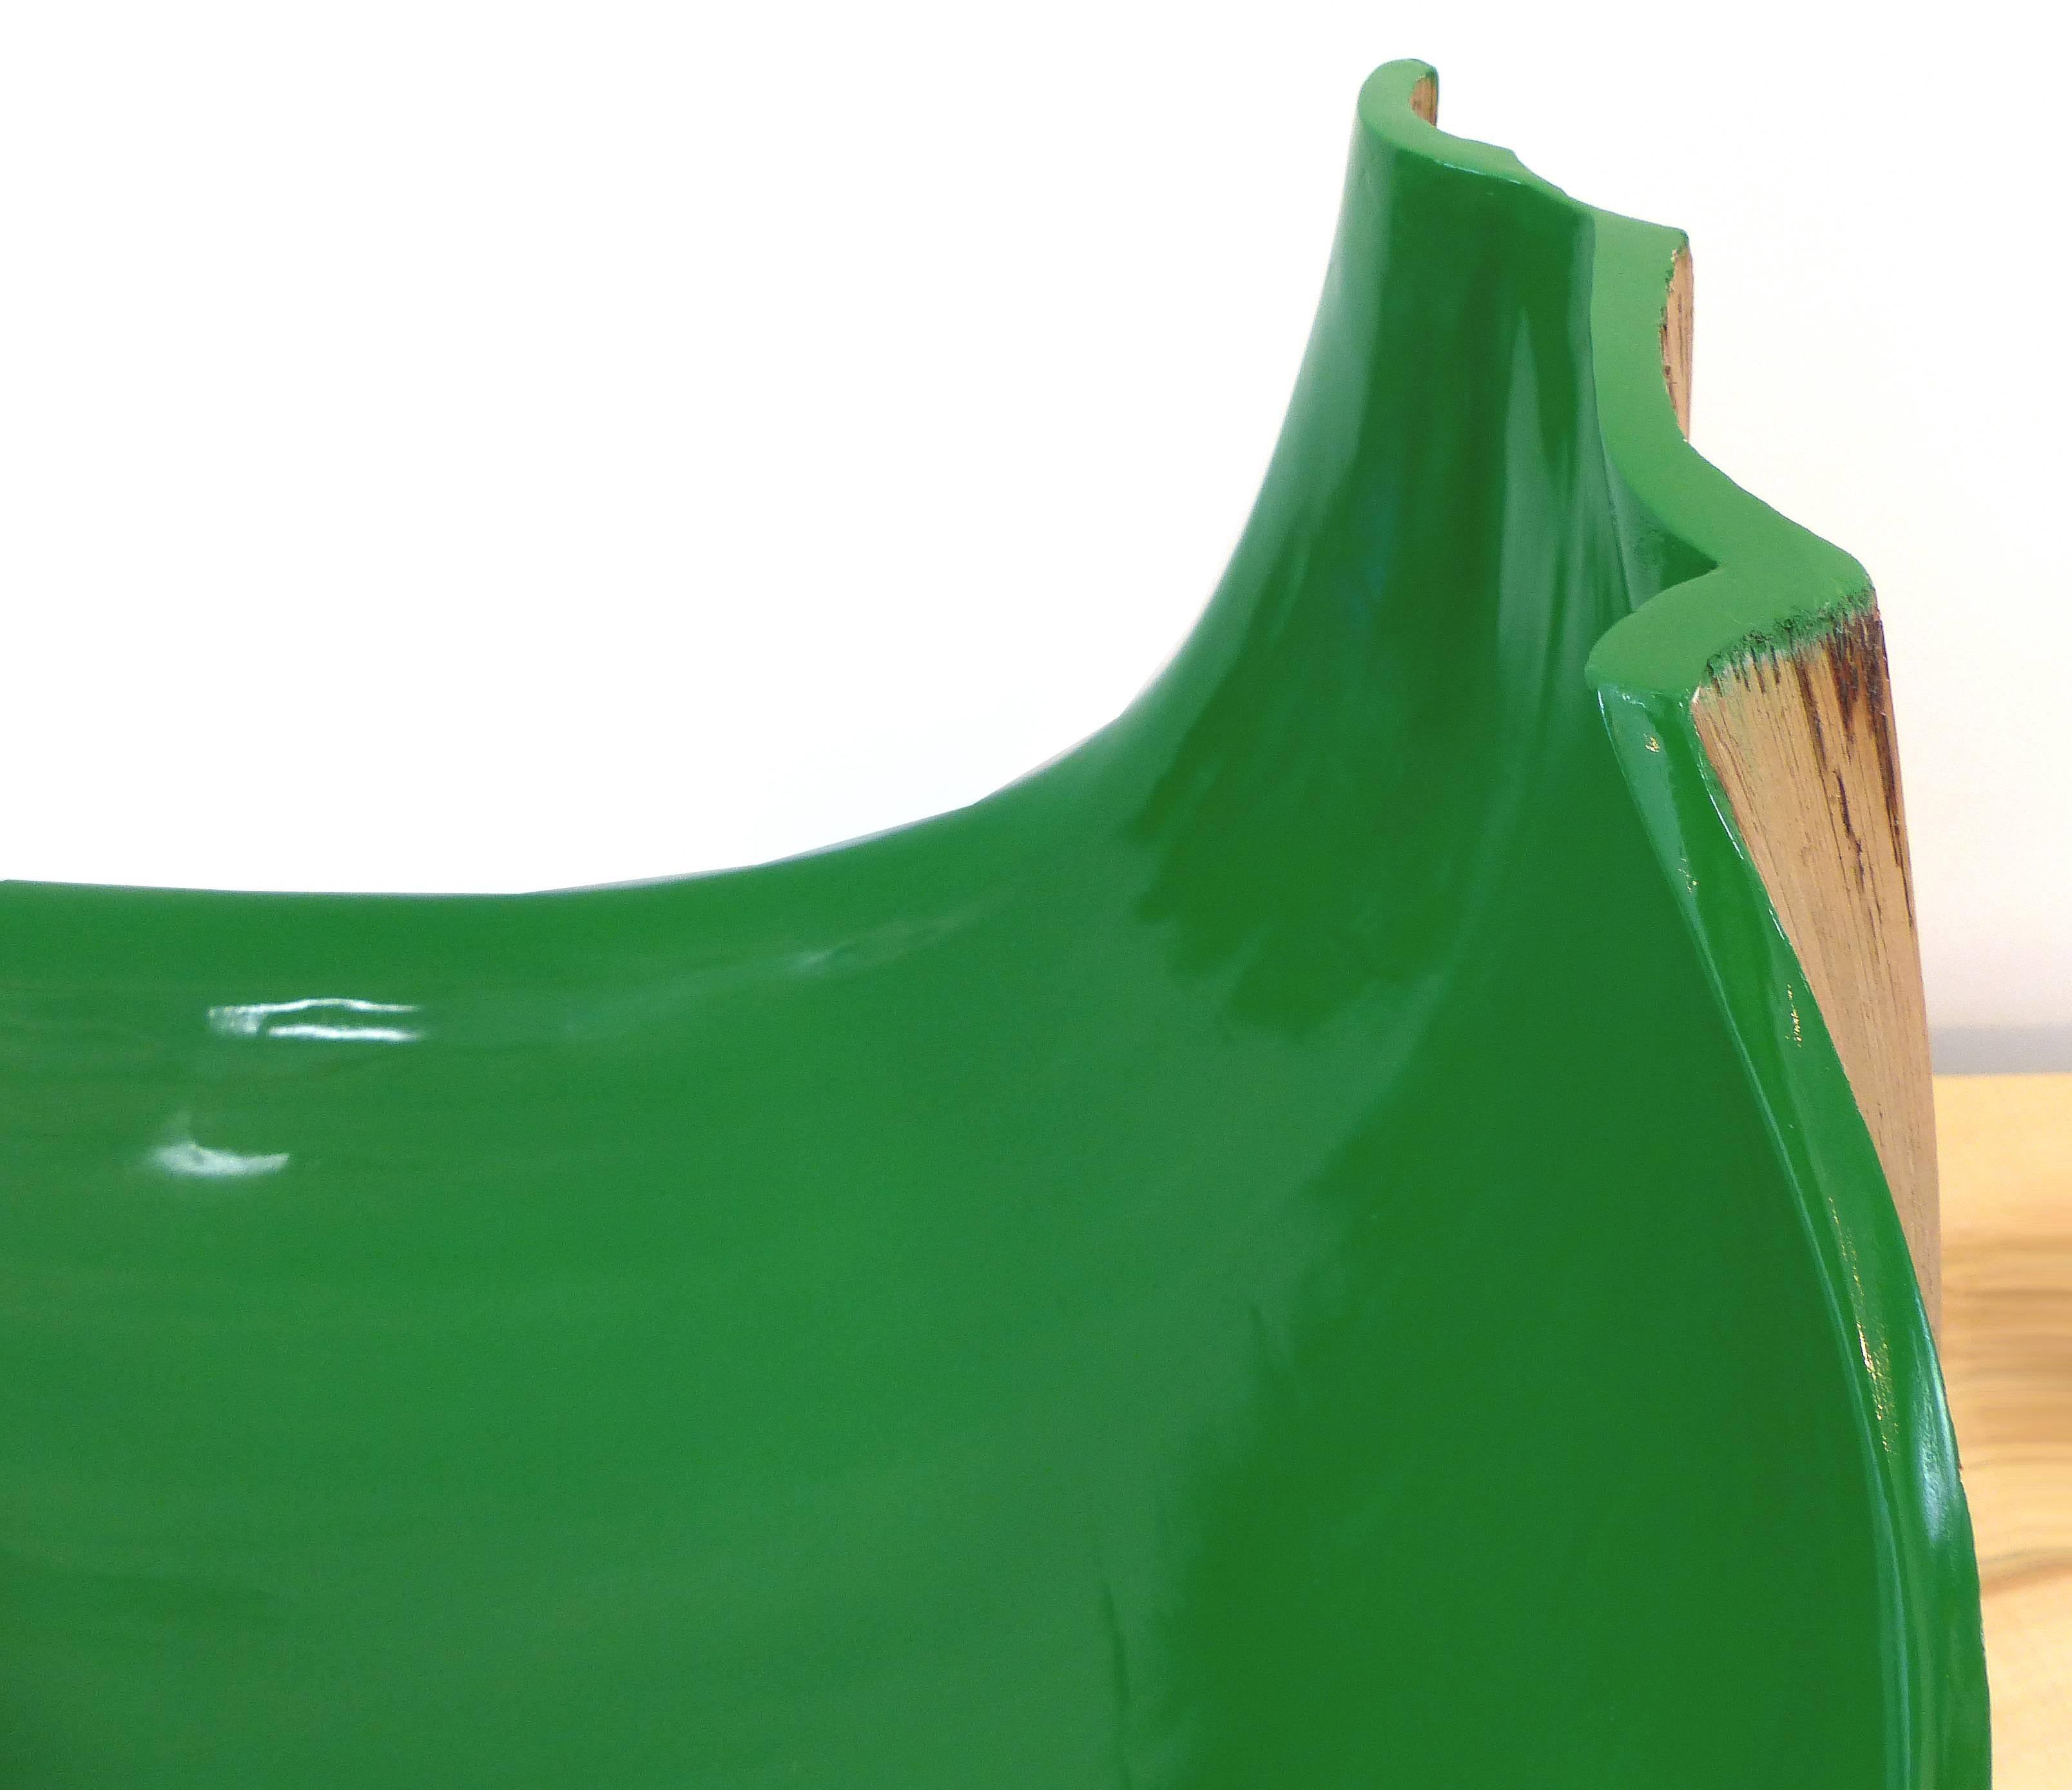 Brazilian Amazon Coconut Palm Frond Sculptural Bowl by Valeria Totti

Offered is a Brazilian coconut palm frond as found by artist Valeria Totti. It has been painted with an emerald green enamel paint for decorative purposes. These palm fronds are